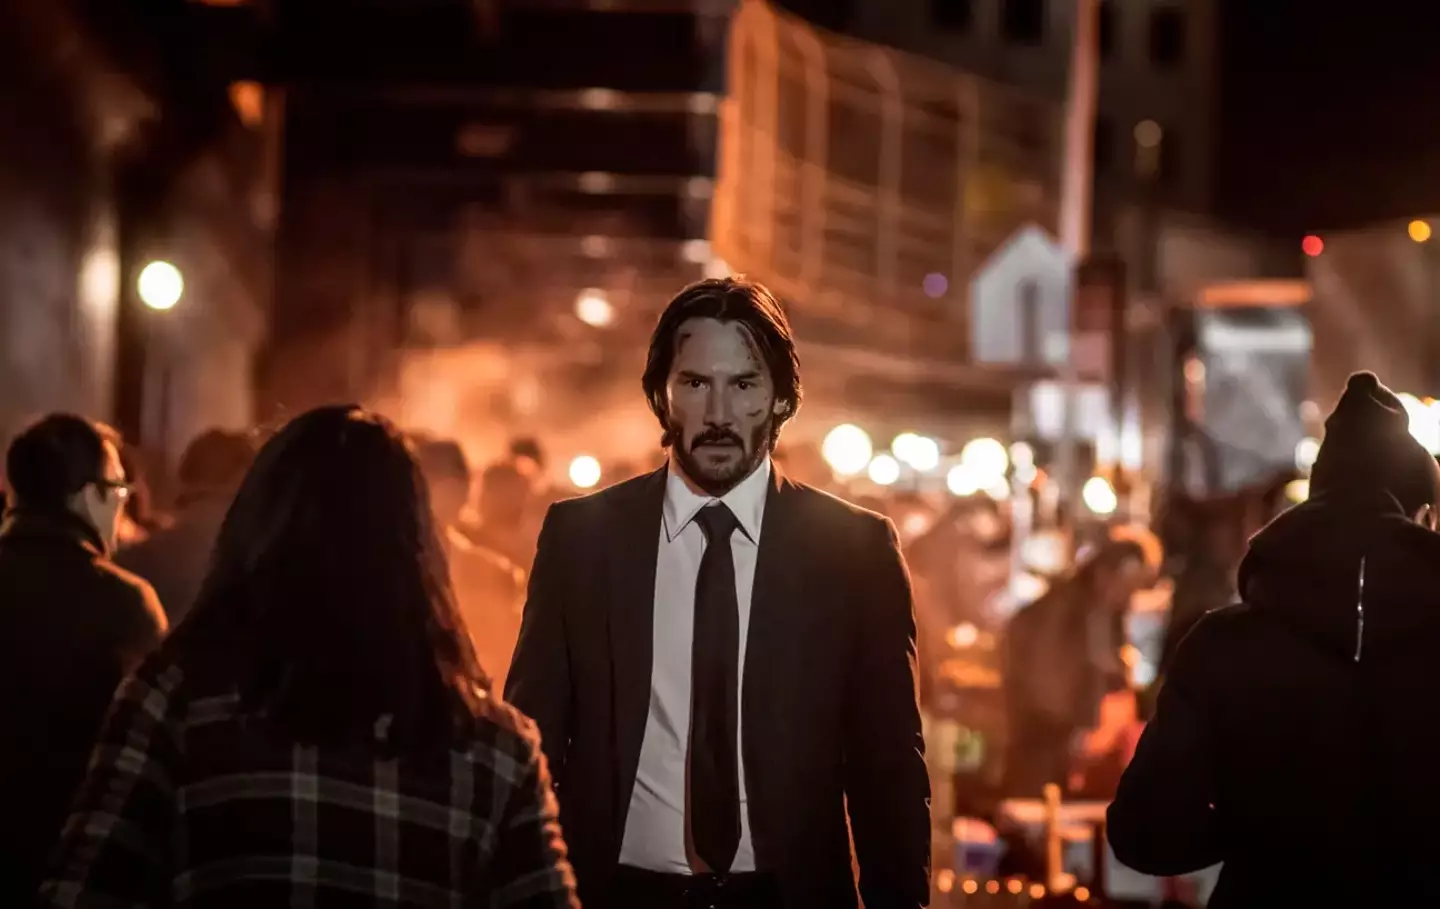 Keanu Reeves will reprise his role as John Wick in the new Ballerina film.